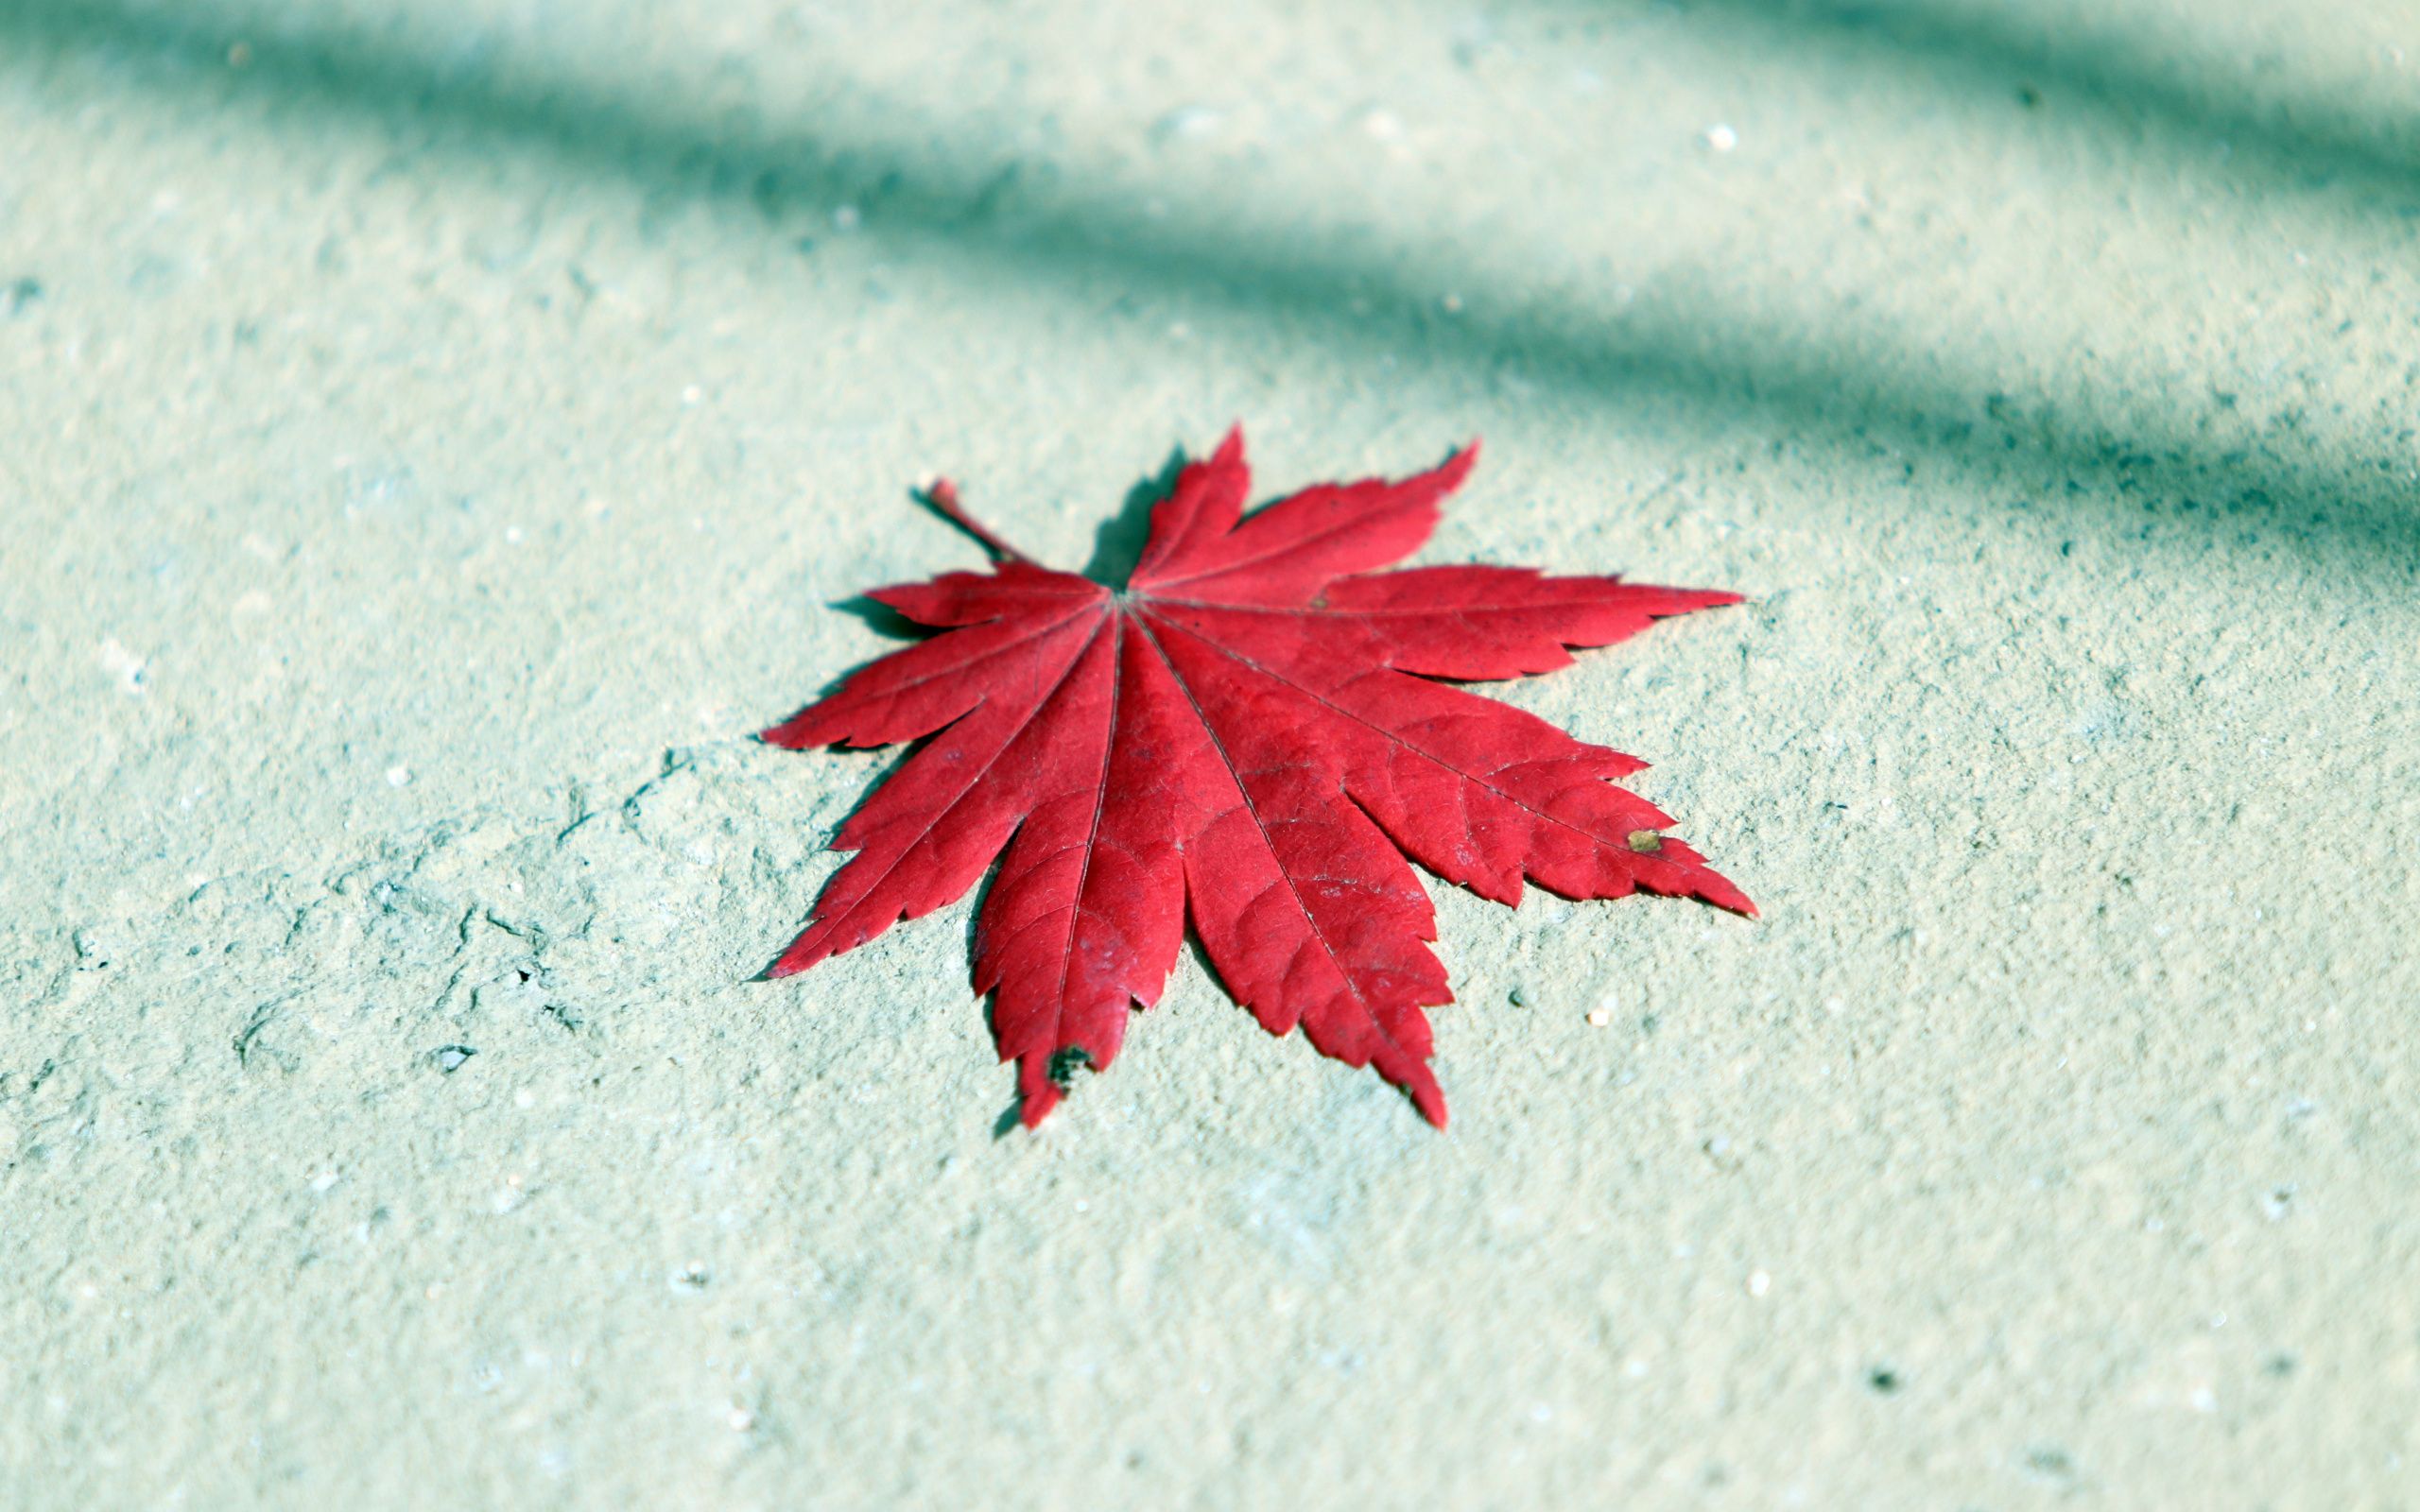 Download Autumn, maple leaf, red wallpaper, 2560x Dual Wide, Widescreen 16: Widescreen